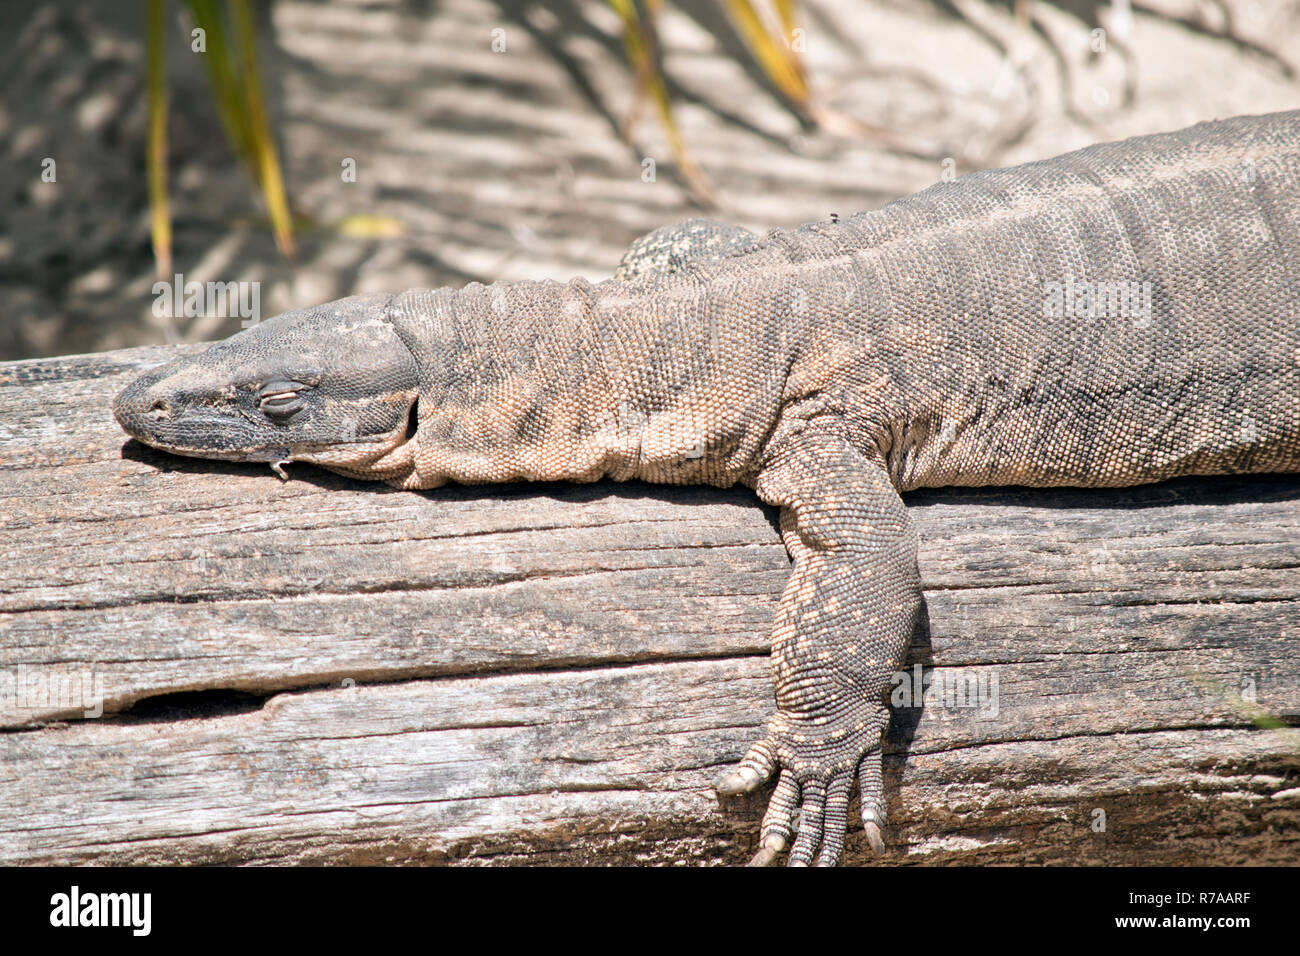 this is a close up of a rosenberg's monitor lizard Stock Photo